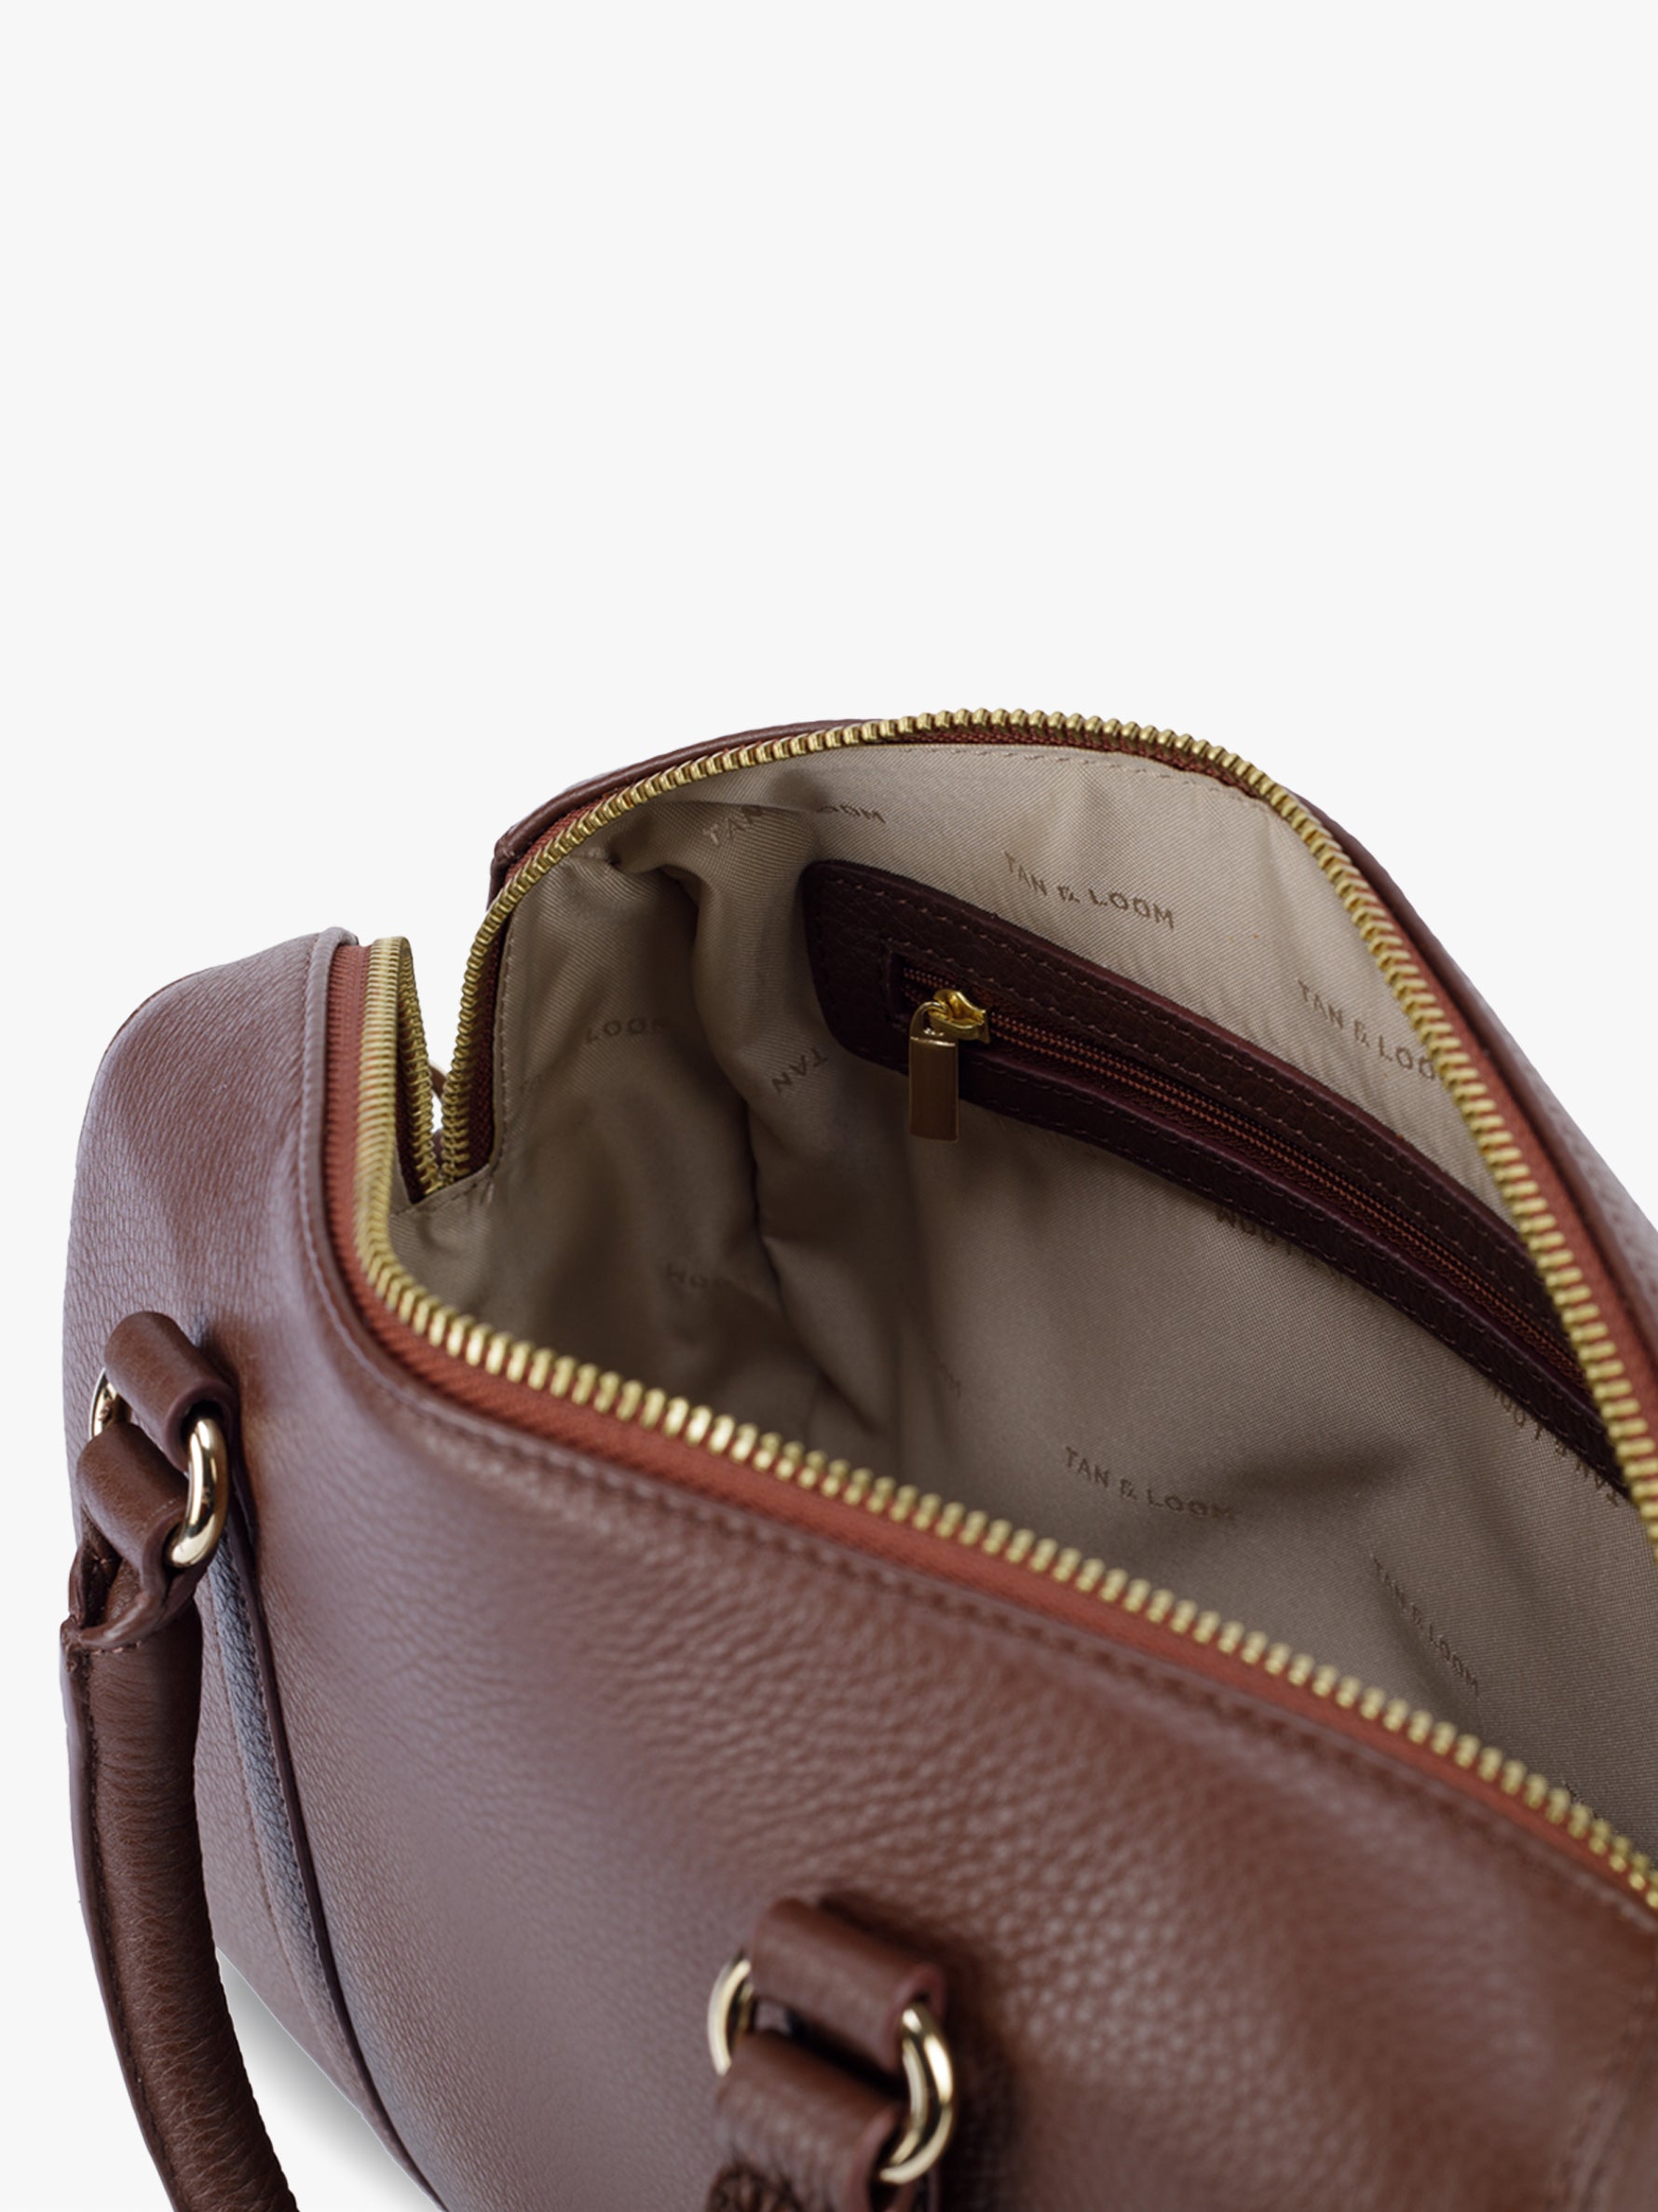 Handcrafted genuine leather boston bag for women Espresso Brown